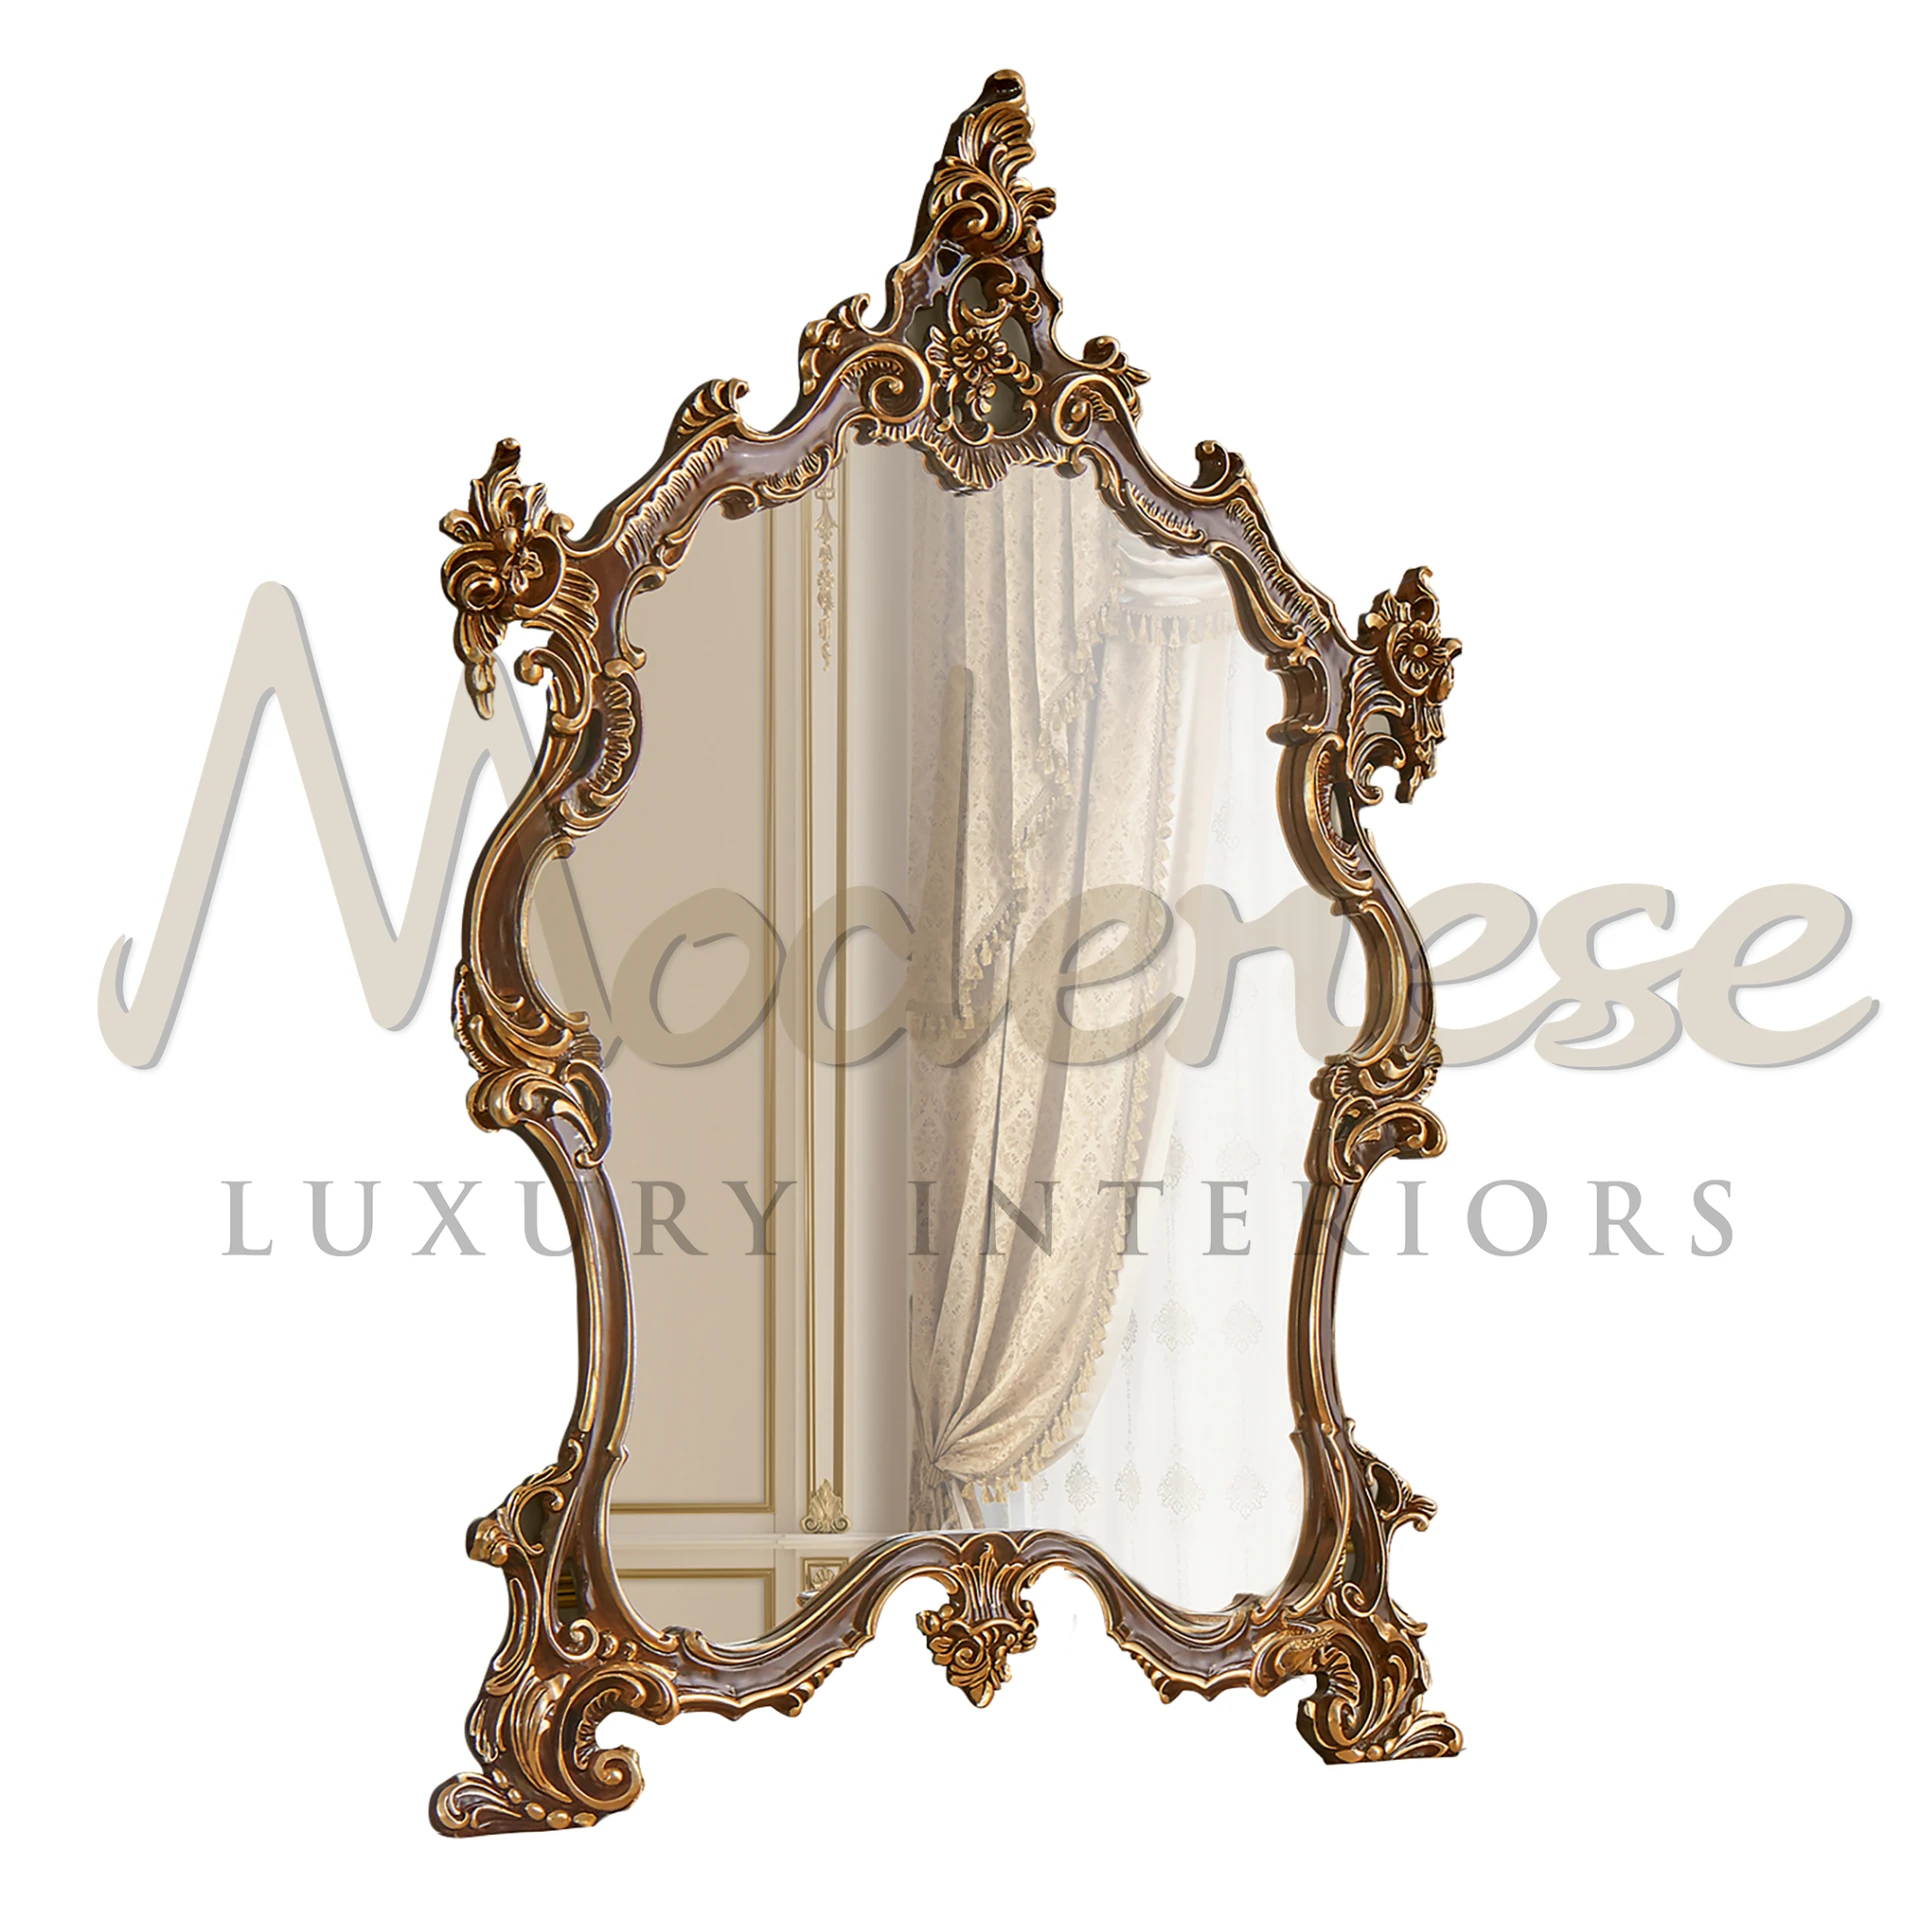 Stylish Ornate Hand-Carved Mirror with intricate motifs, a masterpiece of artisan skill and luxury design.